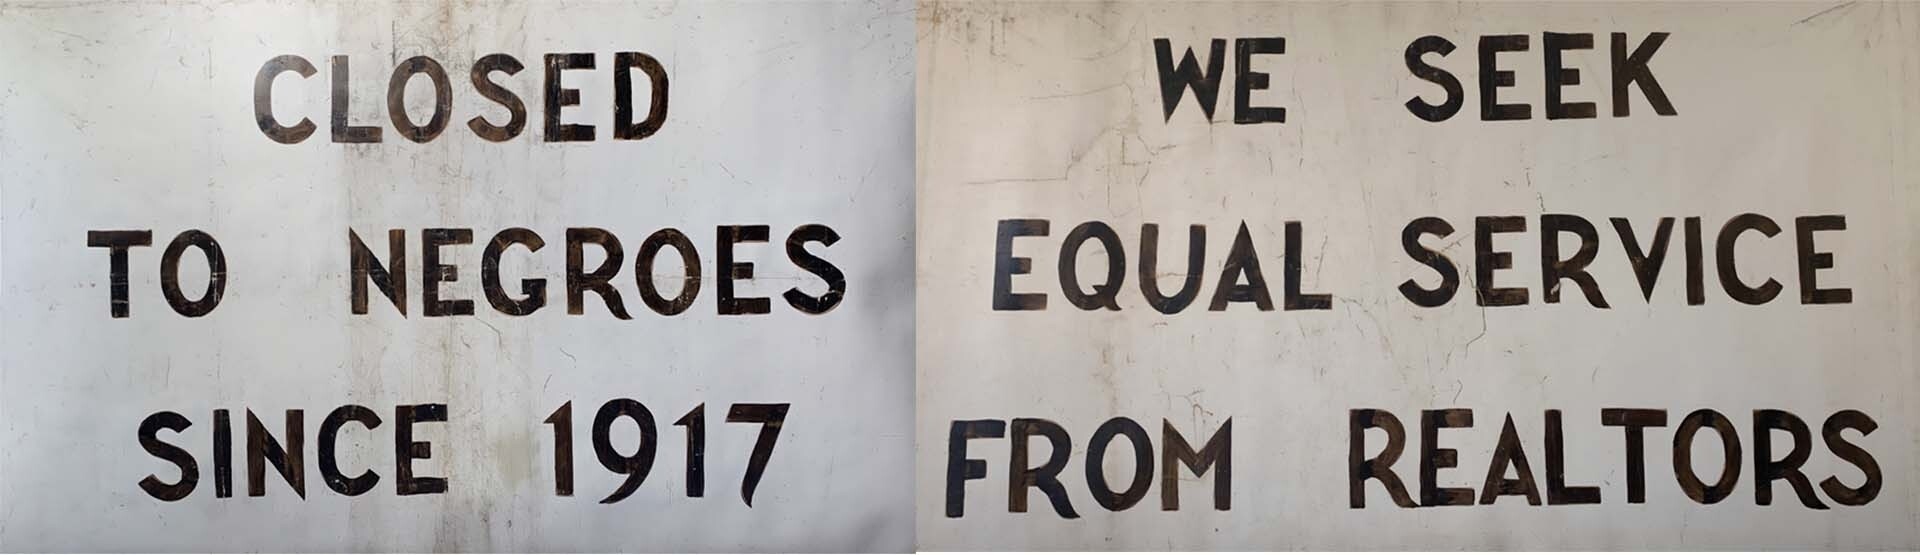 During the summer of 1966, weekly marches demonstrating for a Fair Housing ordinance in Oak Park targeted the real estate industry which did not support legislation that required equal access for all races.These two banners were carried in those marches